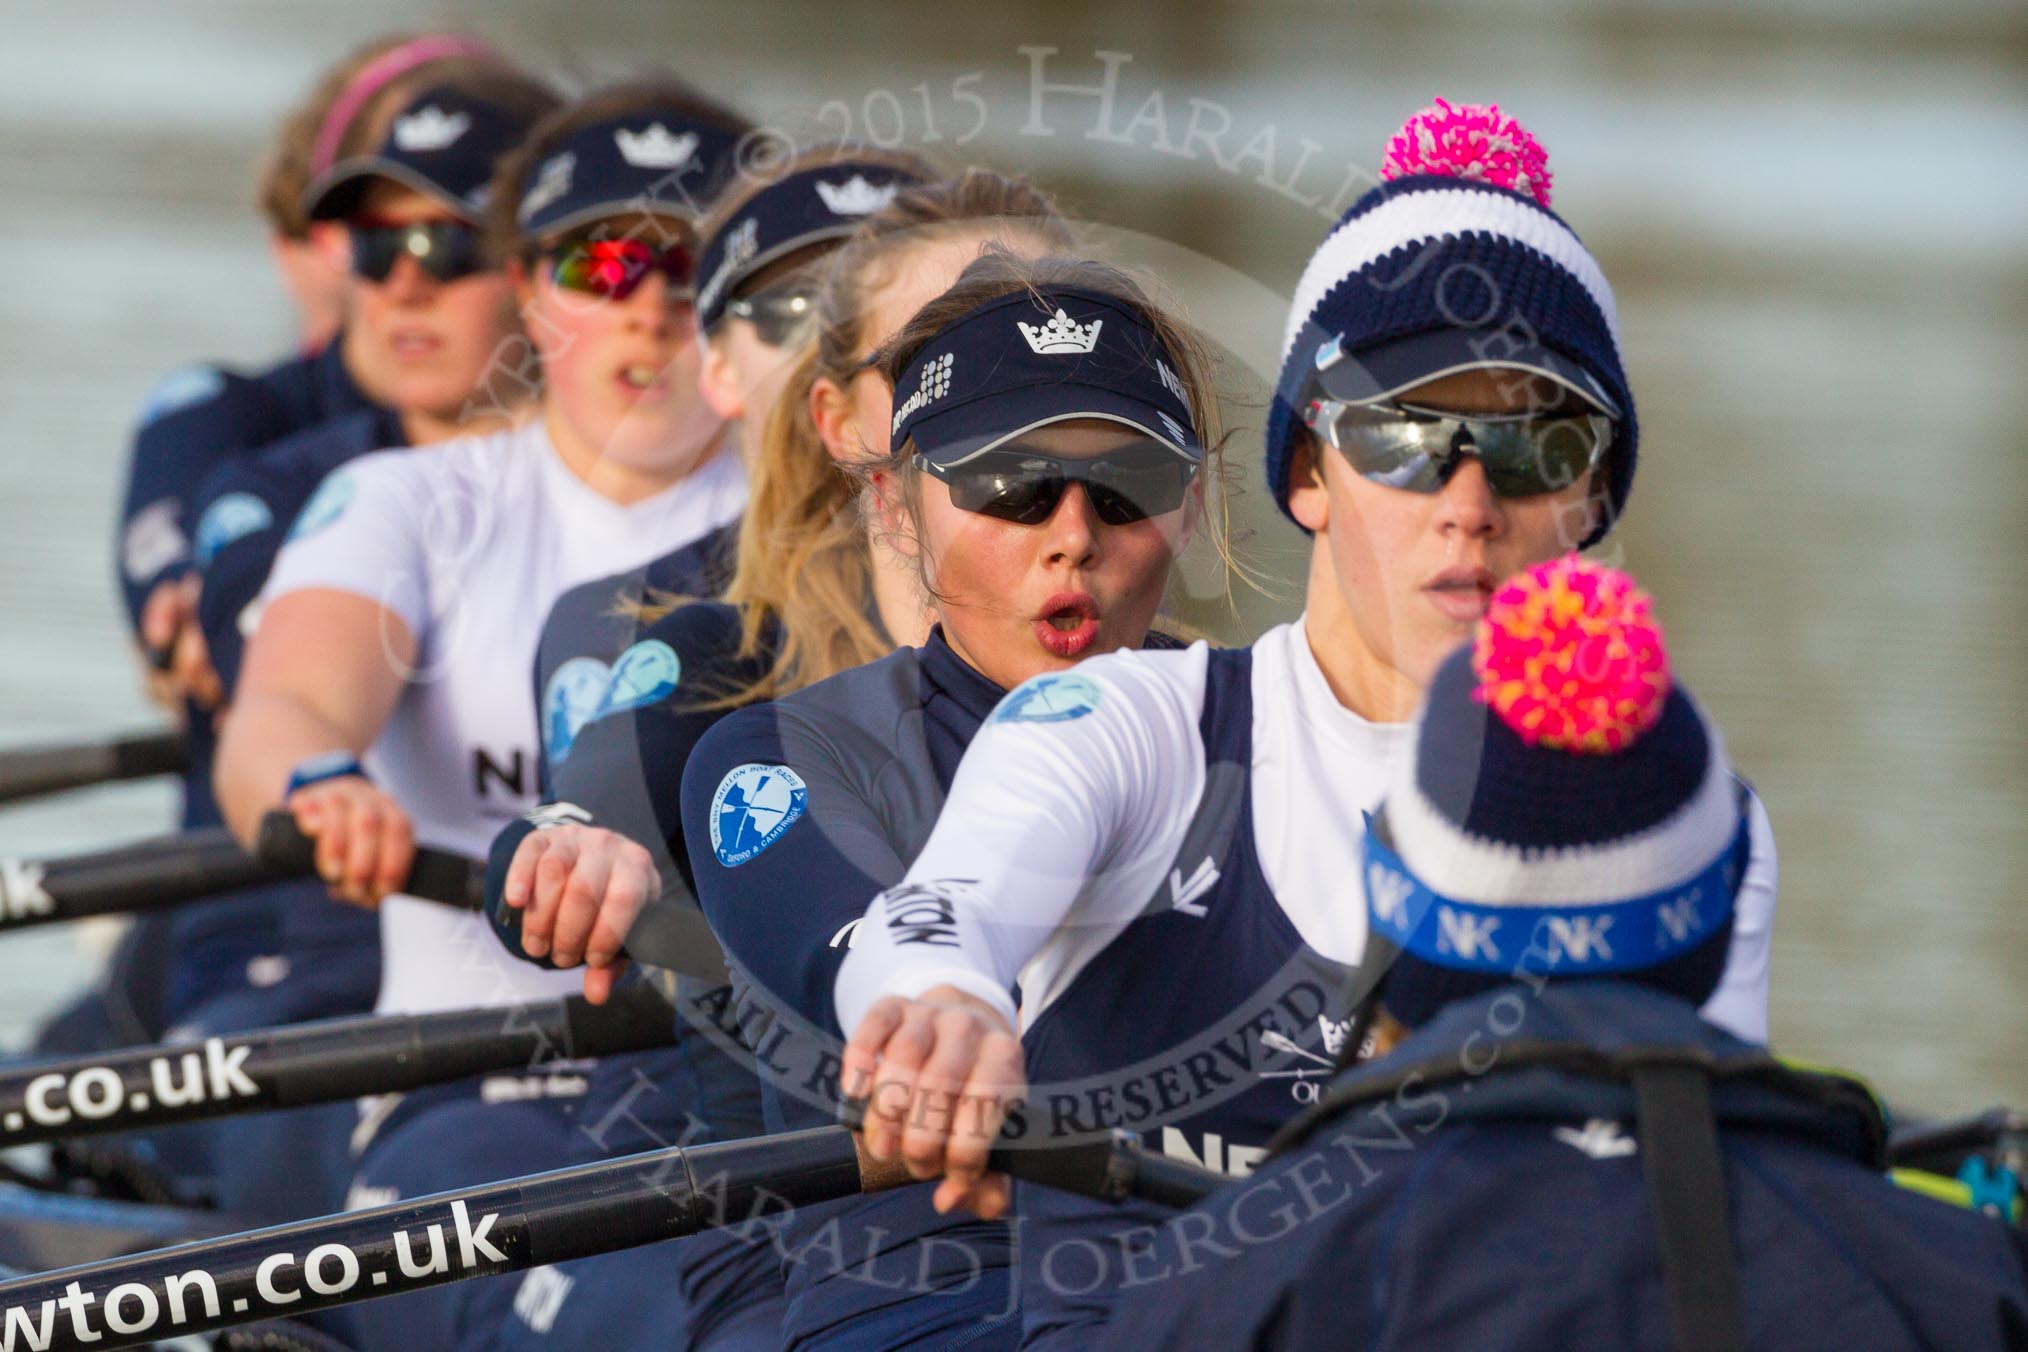 The Boat Race season 2015: OUWBC training Wallingford.

Wallingford,

United Kingdom,
on 04 March 2015 at 15:59, image #137